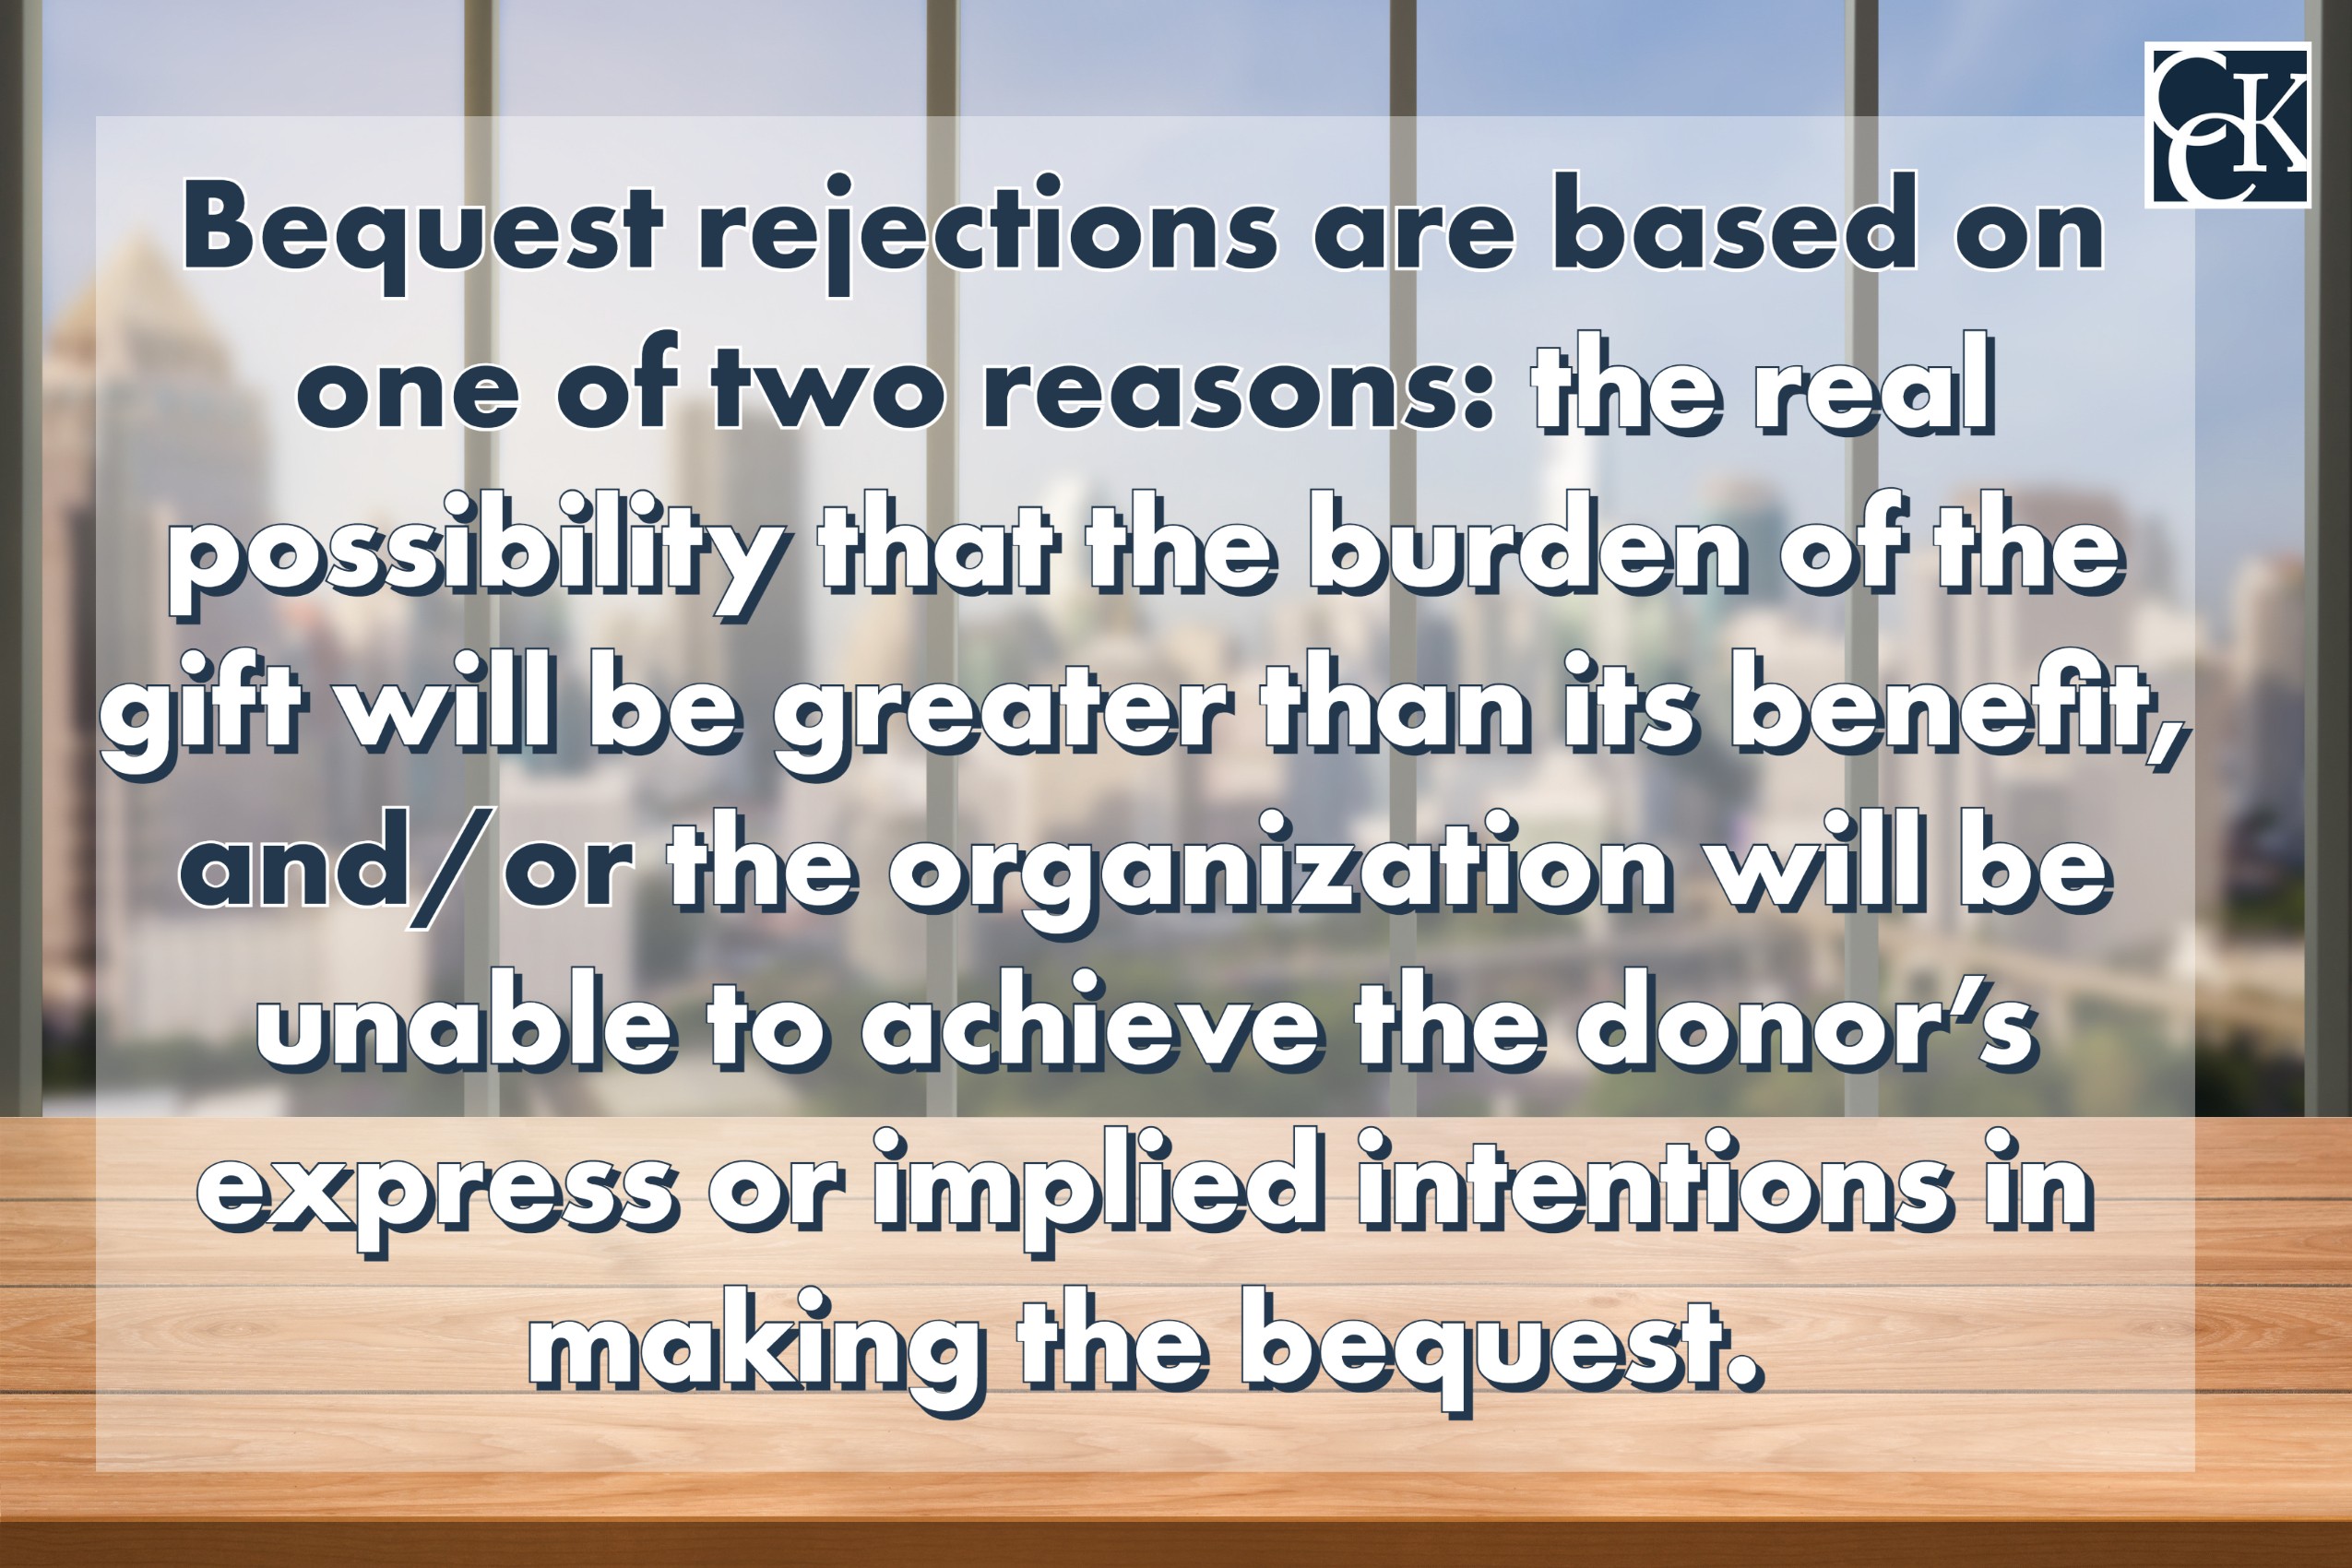 Bequest rejections are based on one of two reasons: the real possibility that the burden of the gift will be greater than its benefit, and/or the organization will be unable to achieve the donor’s express or implied intentions in making the bequest.